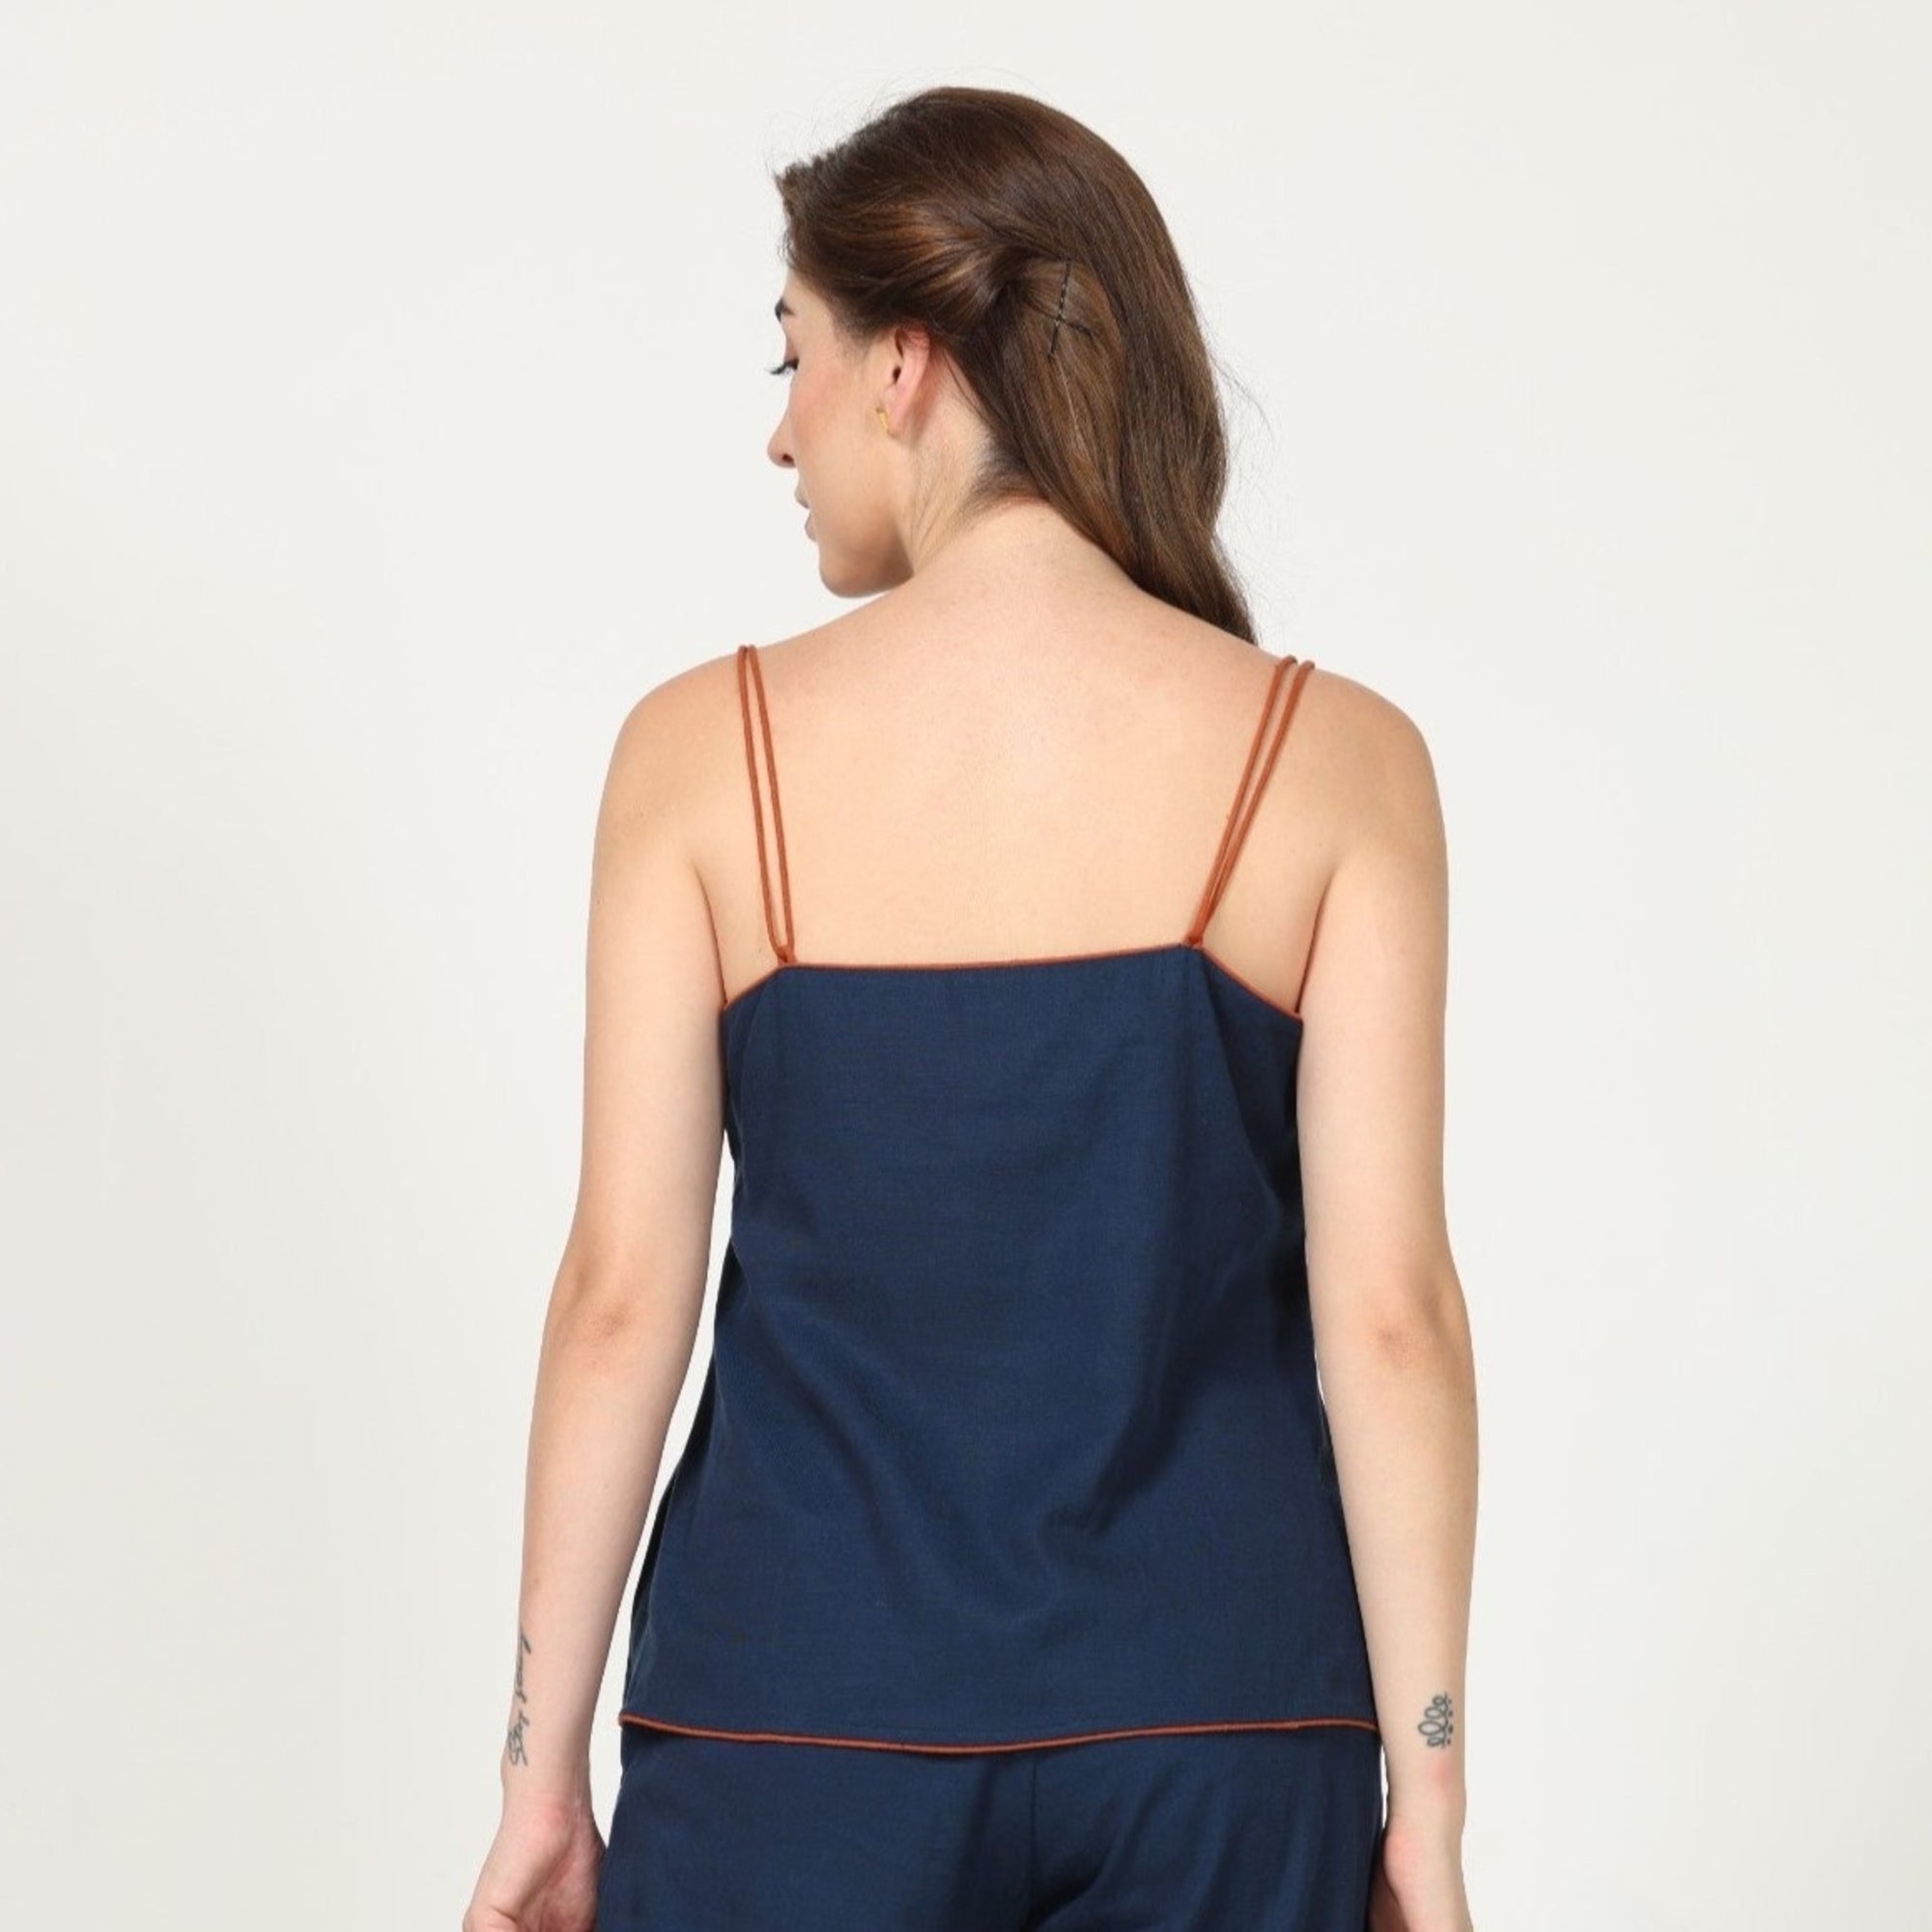 Oh Slip Top - Navy Blue With Contrast Edging - Limited Edition